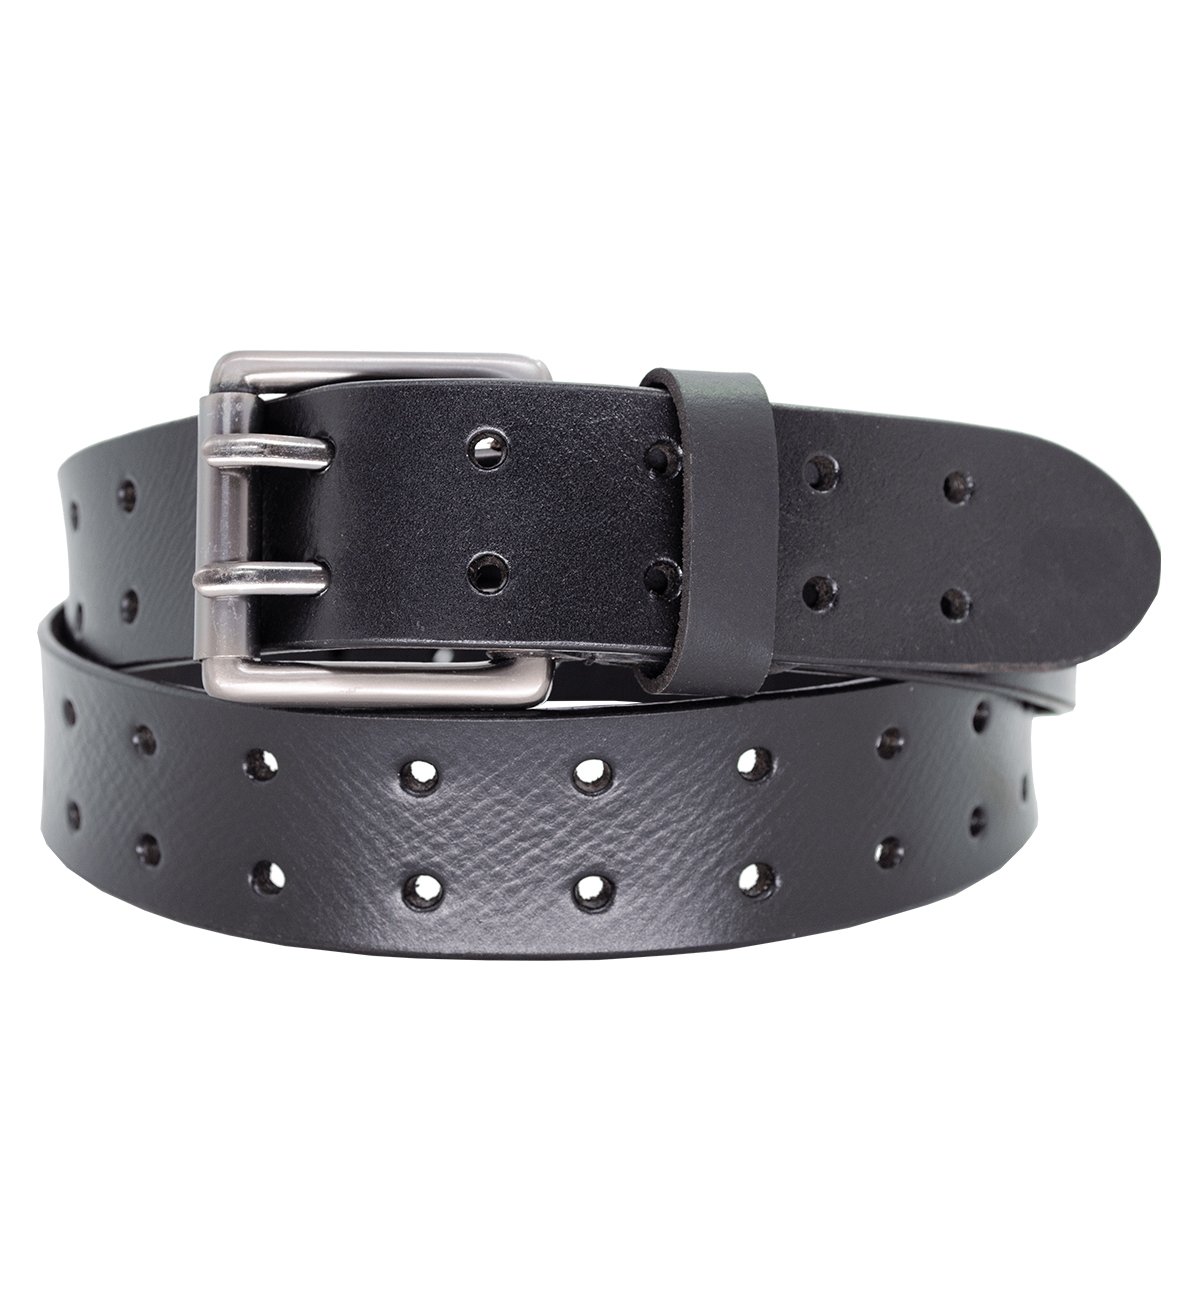 Men's Casual 2 Pin Holes Belt with Heavy Silver Buckle Leather Belt - #BT-1610